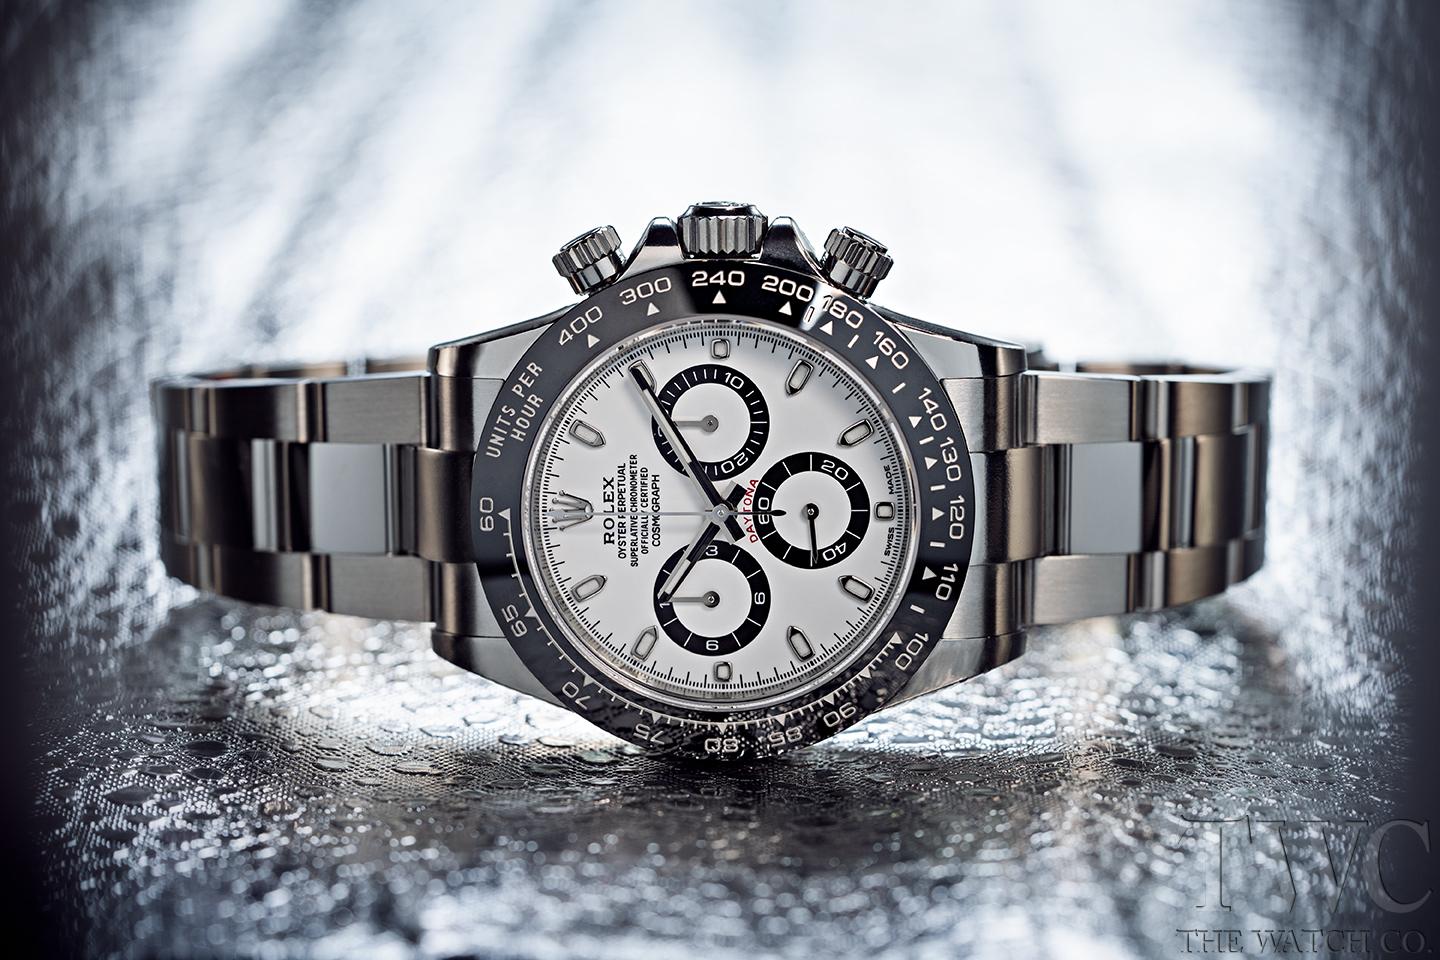 5 Reasons Why You Should Buy A Chronograph Watch - The Watch